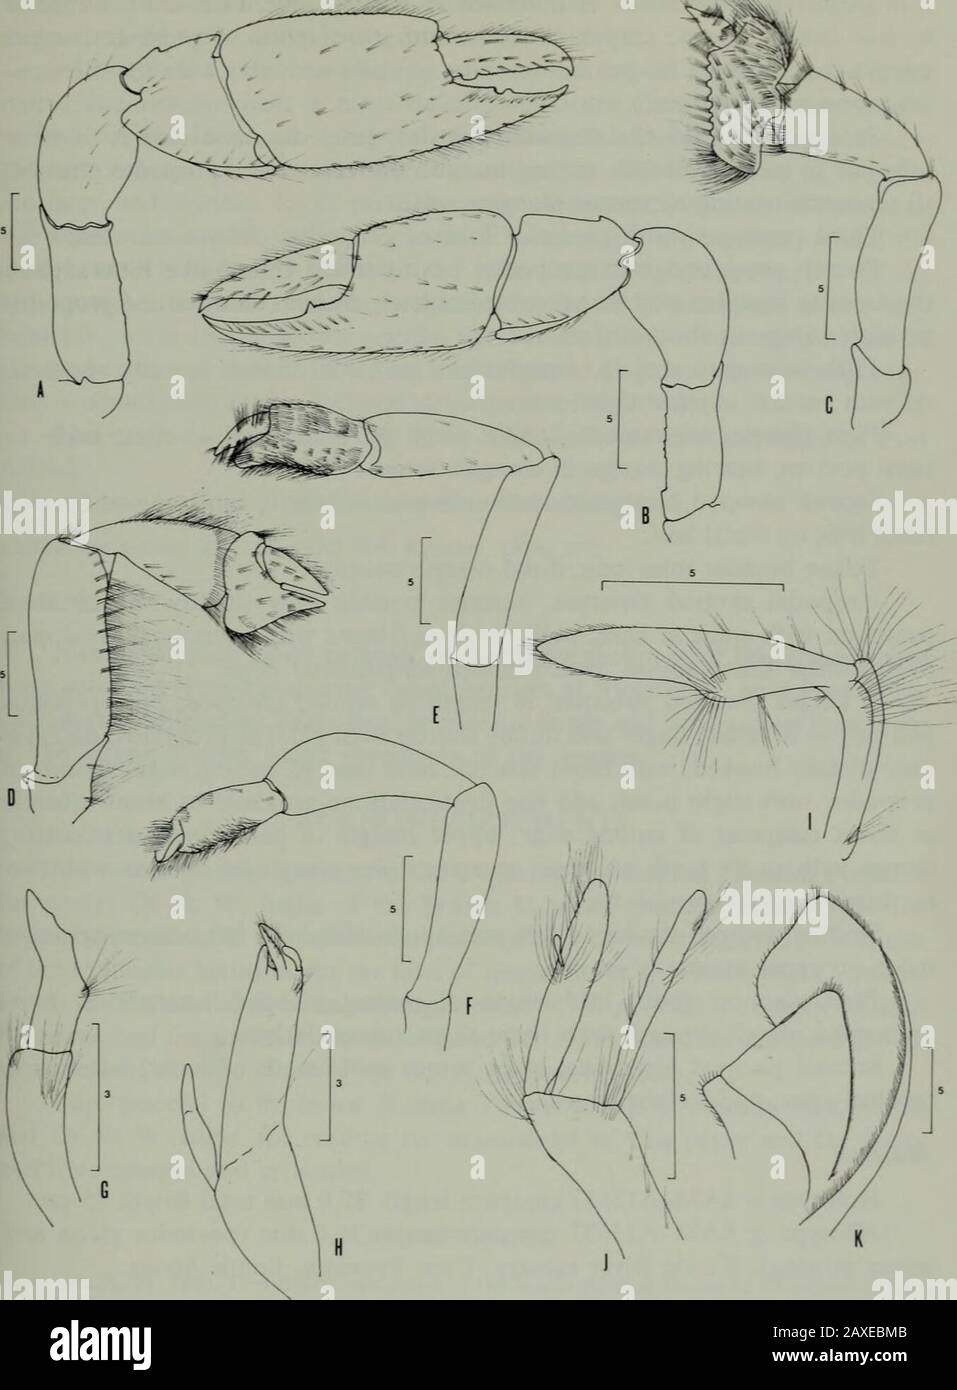 Annals of the South African MuseumAnnale van die Suid-Afrikaanse Museum . Fig. 4. Callianassa pixii sp. n. A. Anterior carapace, eyestalks, and antennae in dorsal view. B. Telson and uropod.C. Mandible. D. First maxilla. E. Second maxilla. F. First maxilliped. G. Second maxilliped. H. Third maxilliped, inner view. RECORDS OF MUD-PRAWNS FROM SOUTH AFRICA AND MAURITIUS 55. Fig. 5. Callianassa pixii sp. n. A. Larger cheliped J. B. Smaller cheliped $. C. Third pereiopod. D. Second pereiopod. E. Fourth pereiopod. F. Fifth pereiopod. G. First pleopod q. H. Second pleopod J. I. First pleopod ?. J. Se Stock Photo